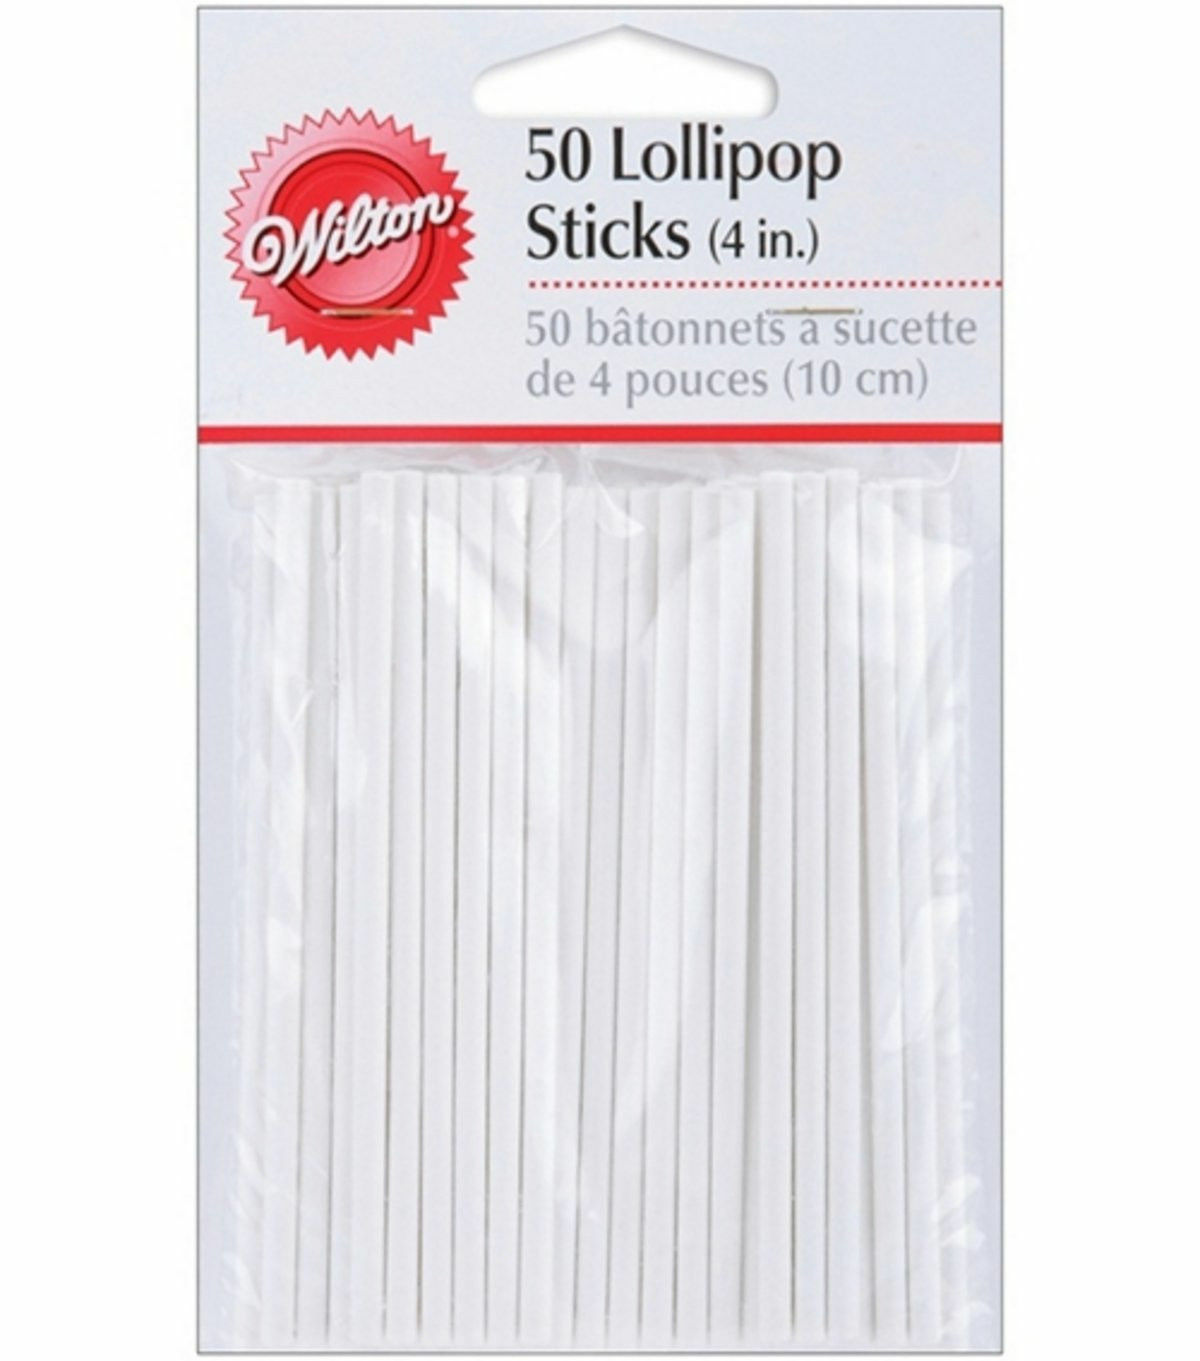 Primary image for Wilton Lollipop Sticks 50 ct 4" Halloween Candy Melts Mold Stick